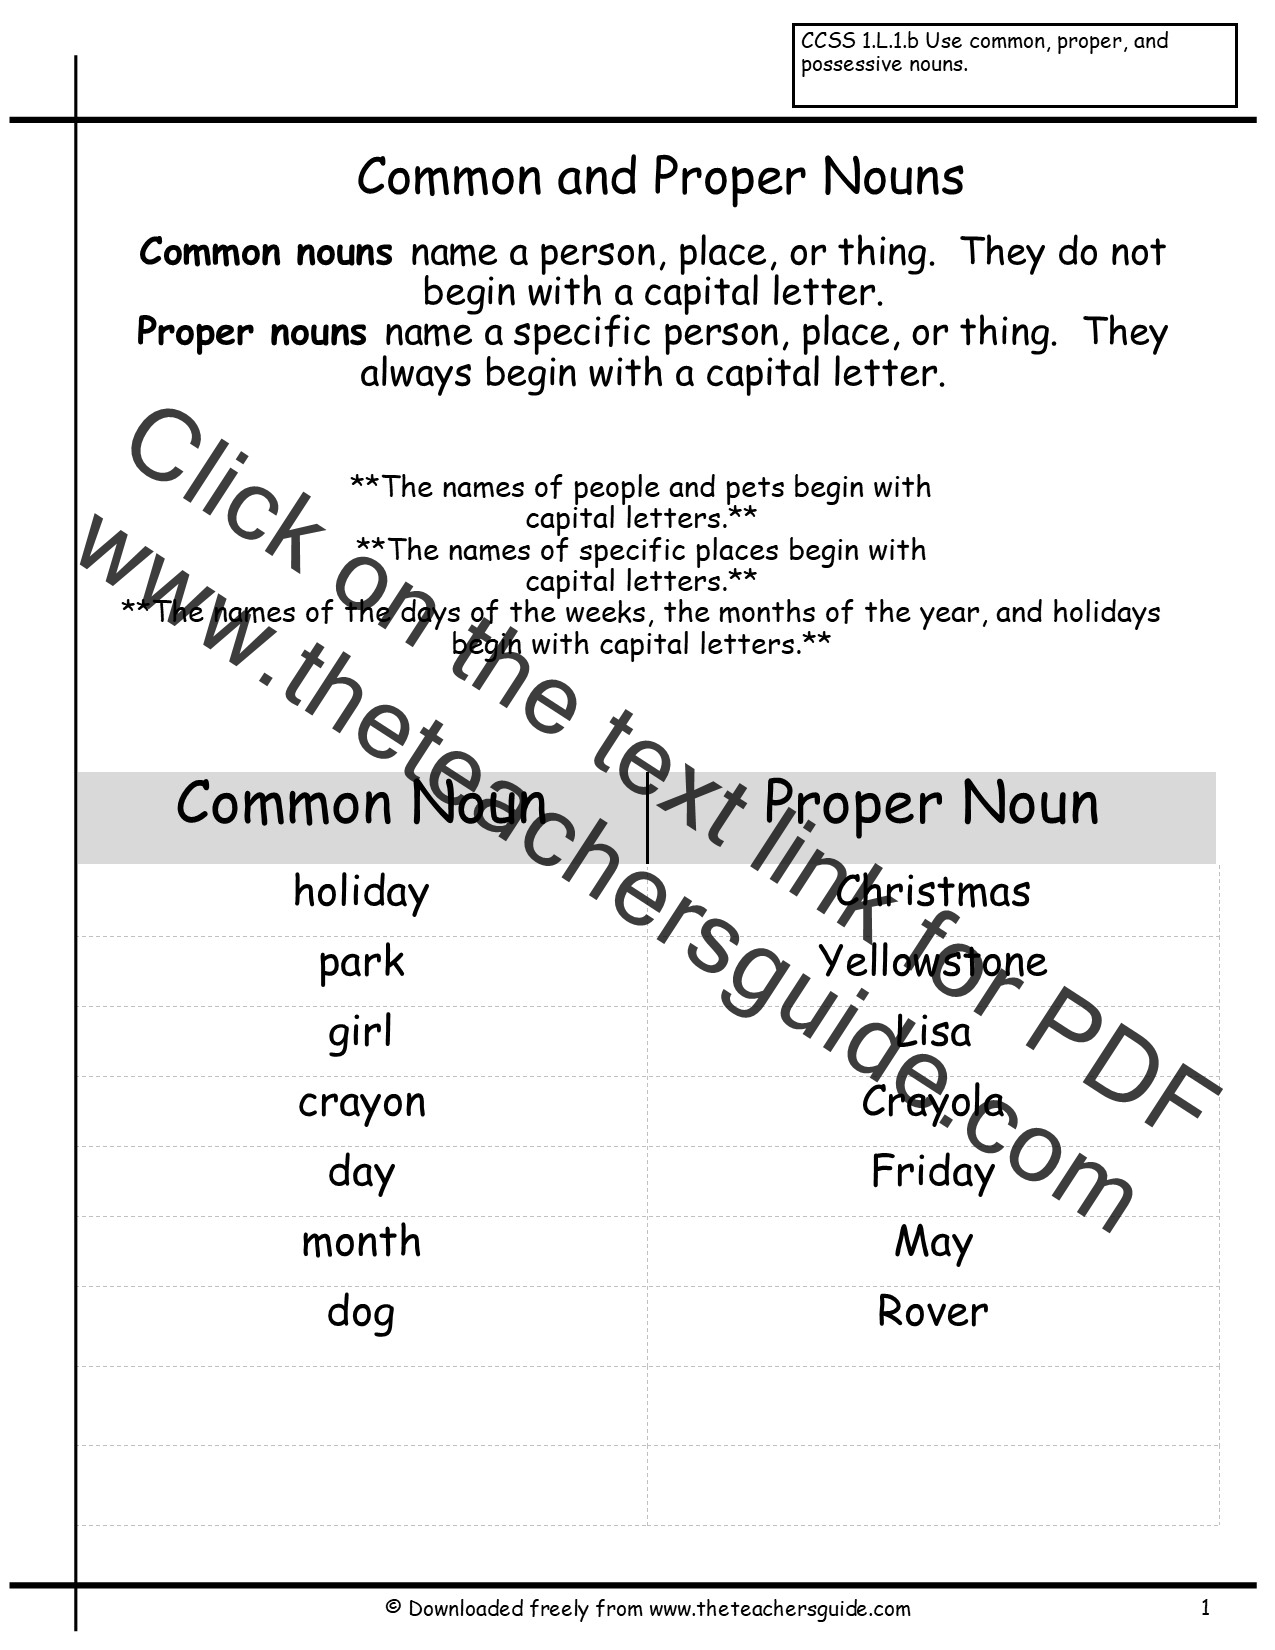 Nouns Worksheets from The Teacher's Guide